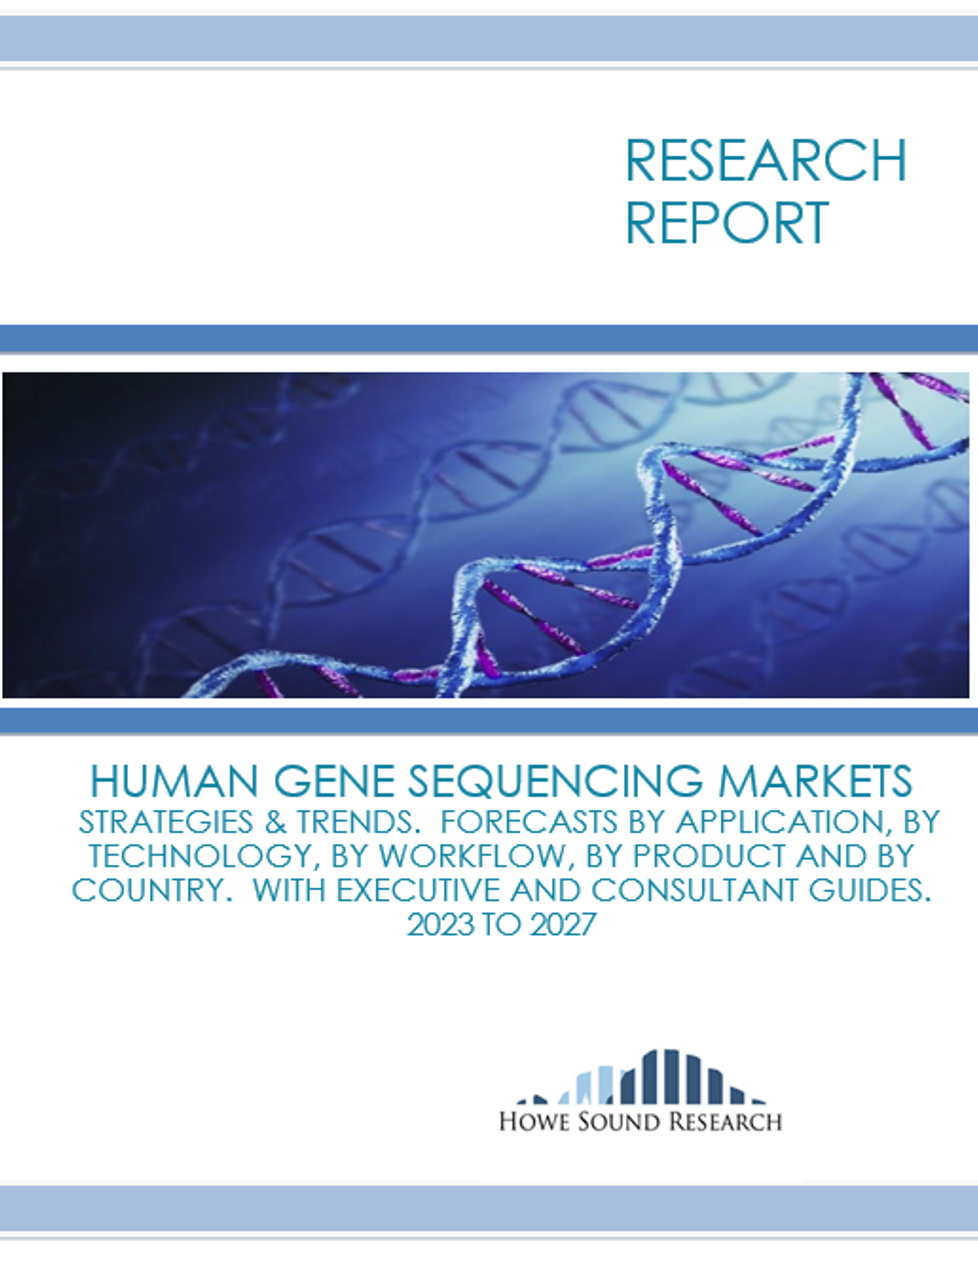 Human Gene sequencing Markets 2023 to 2027